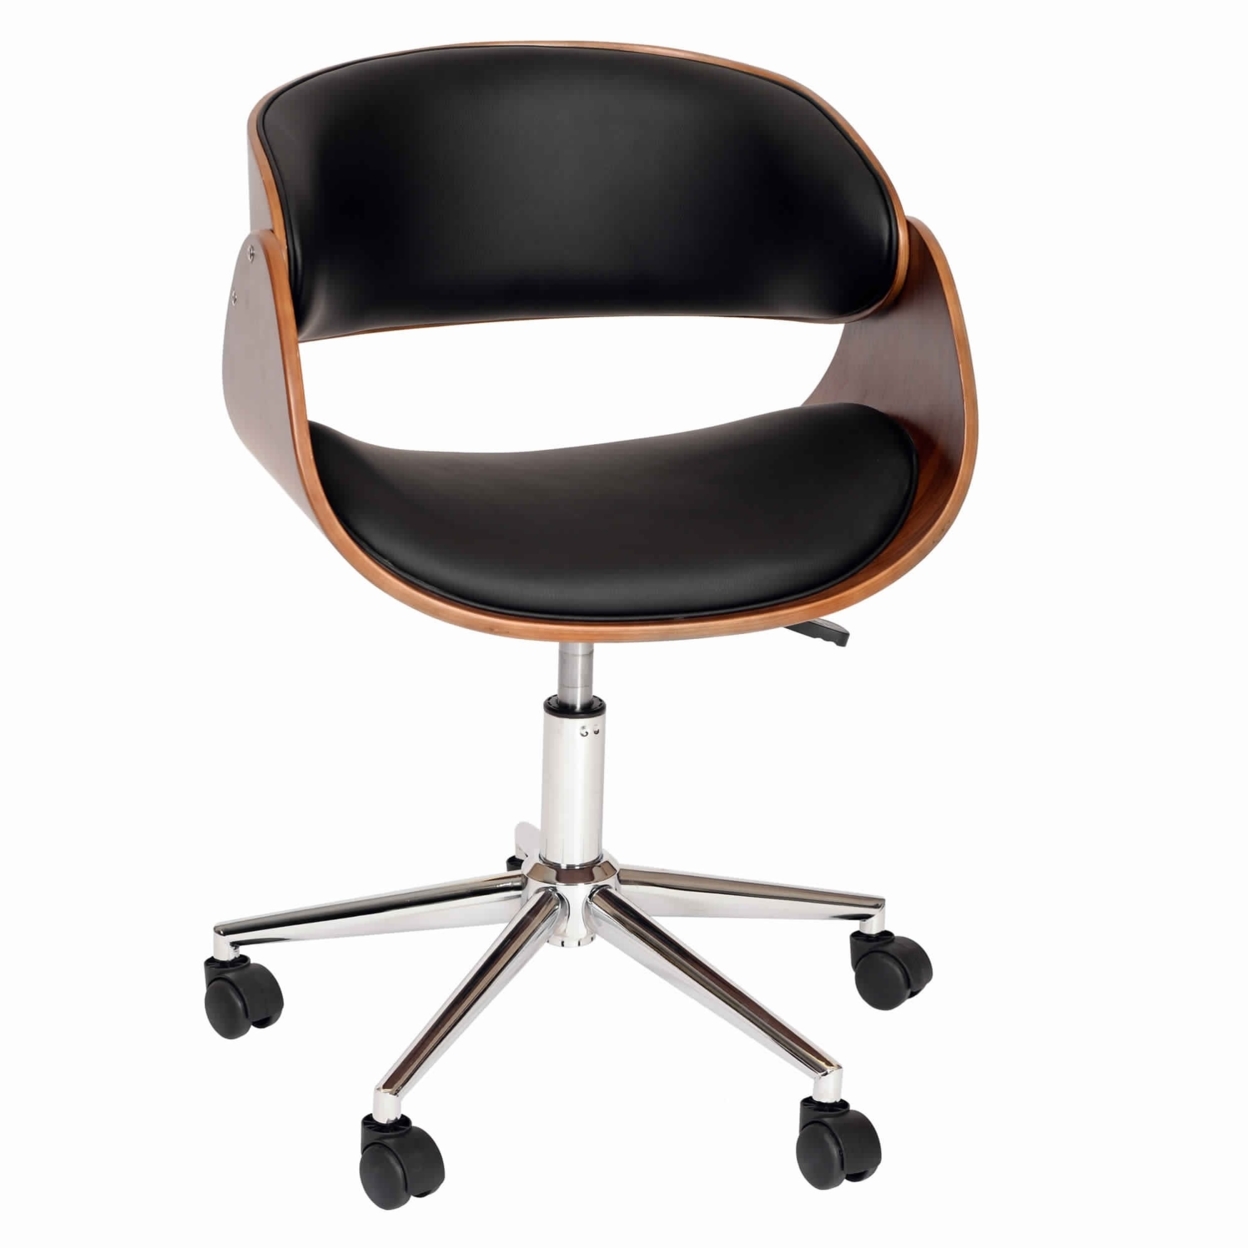 Wooden And Metal Office Chair With Curved Leatherette Seat, Brown And Black- Saltoro Sherpi